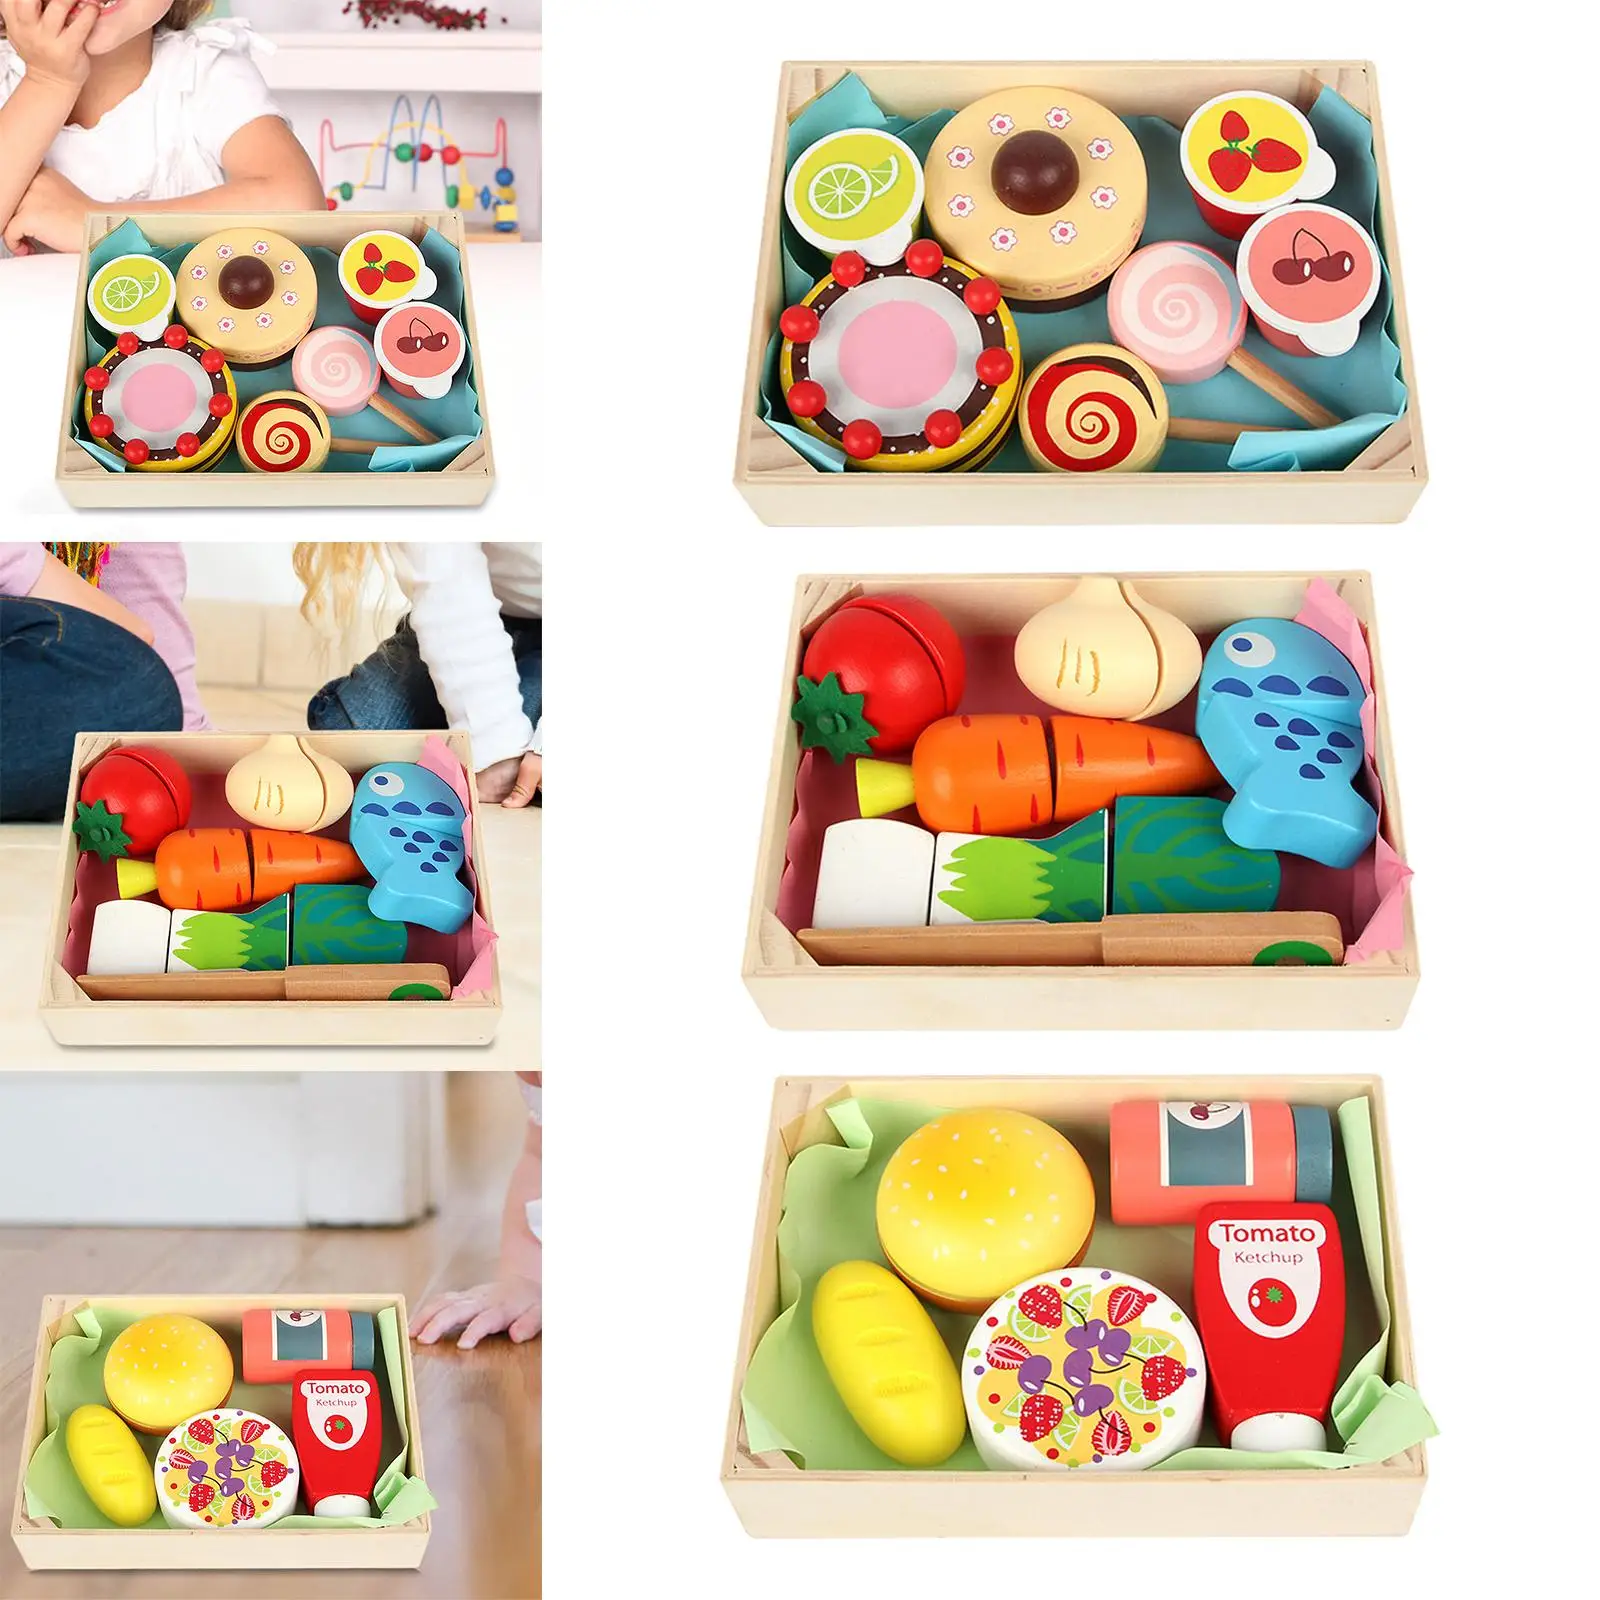 Simulation Food Pretend Playset Educational Toys Pretend Role Play Hands on Ability